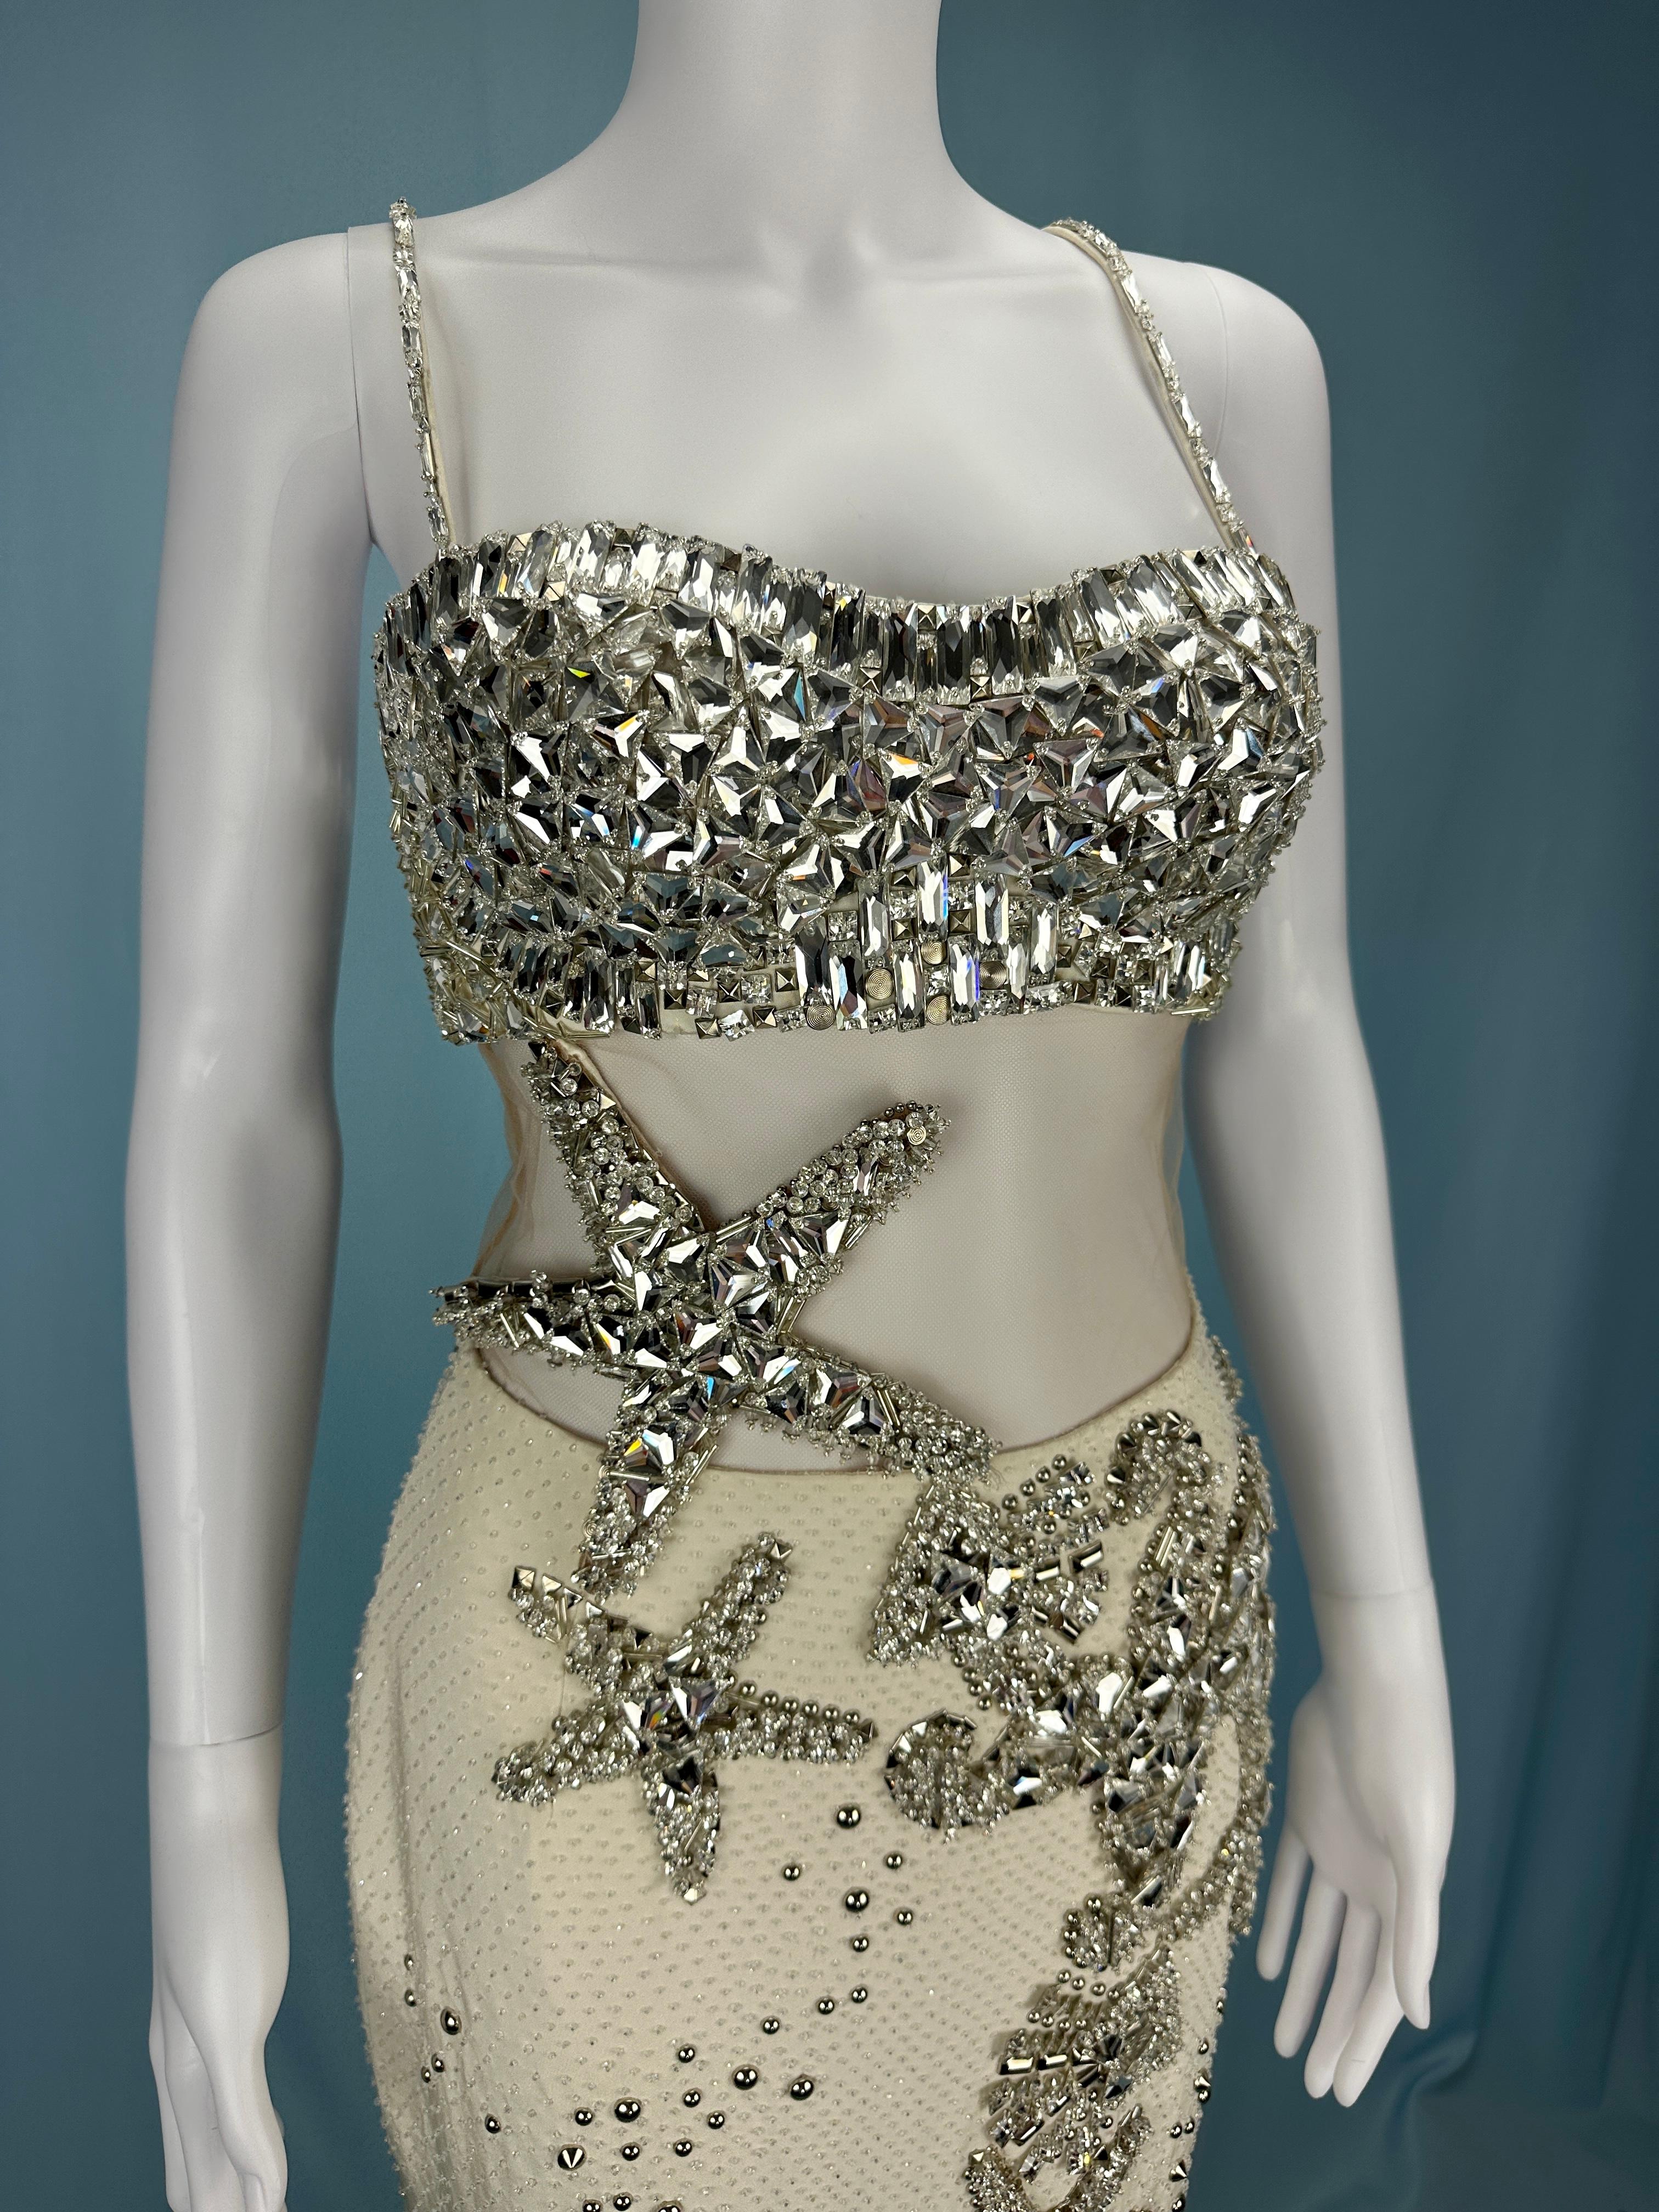 Atelier Versace Spring 2012 Runway Crystal Embellished Starfish Shell Dress 5